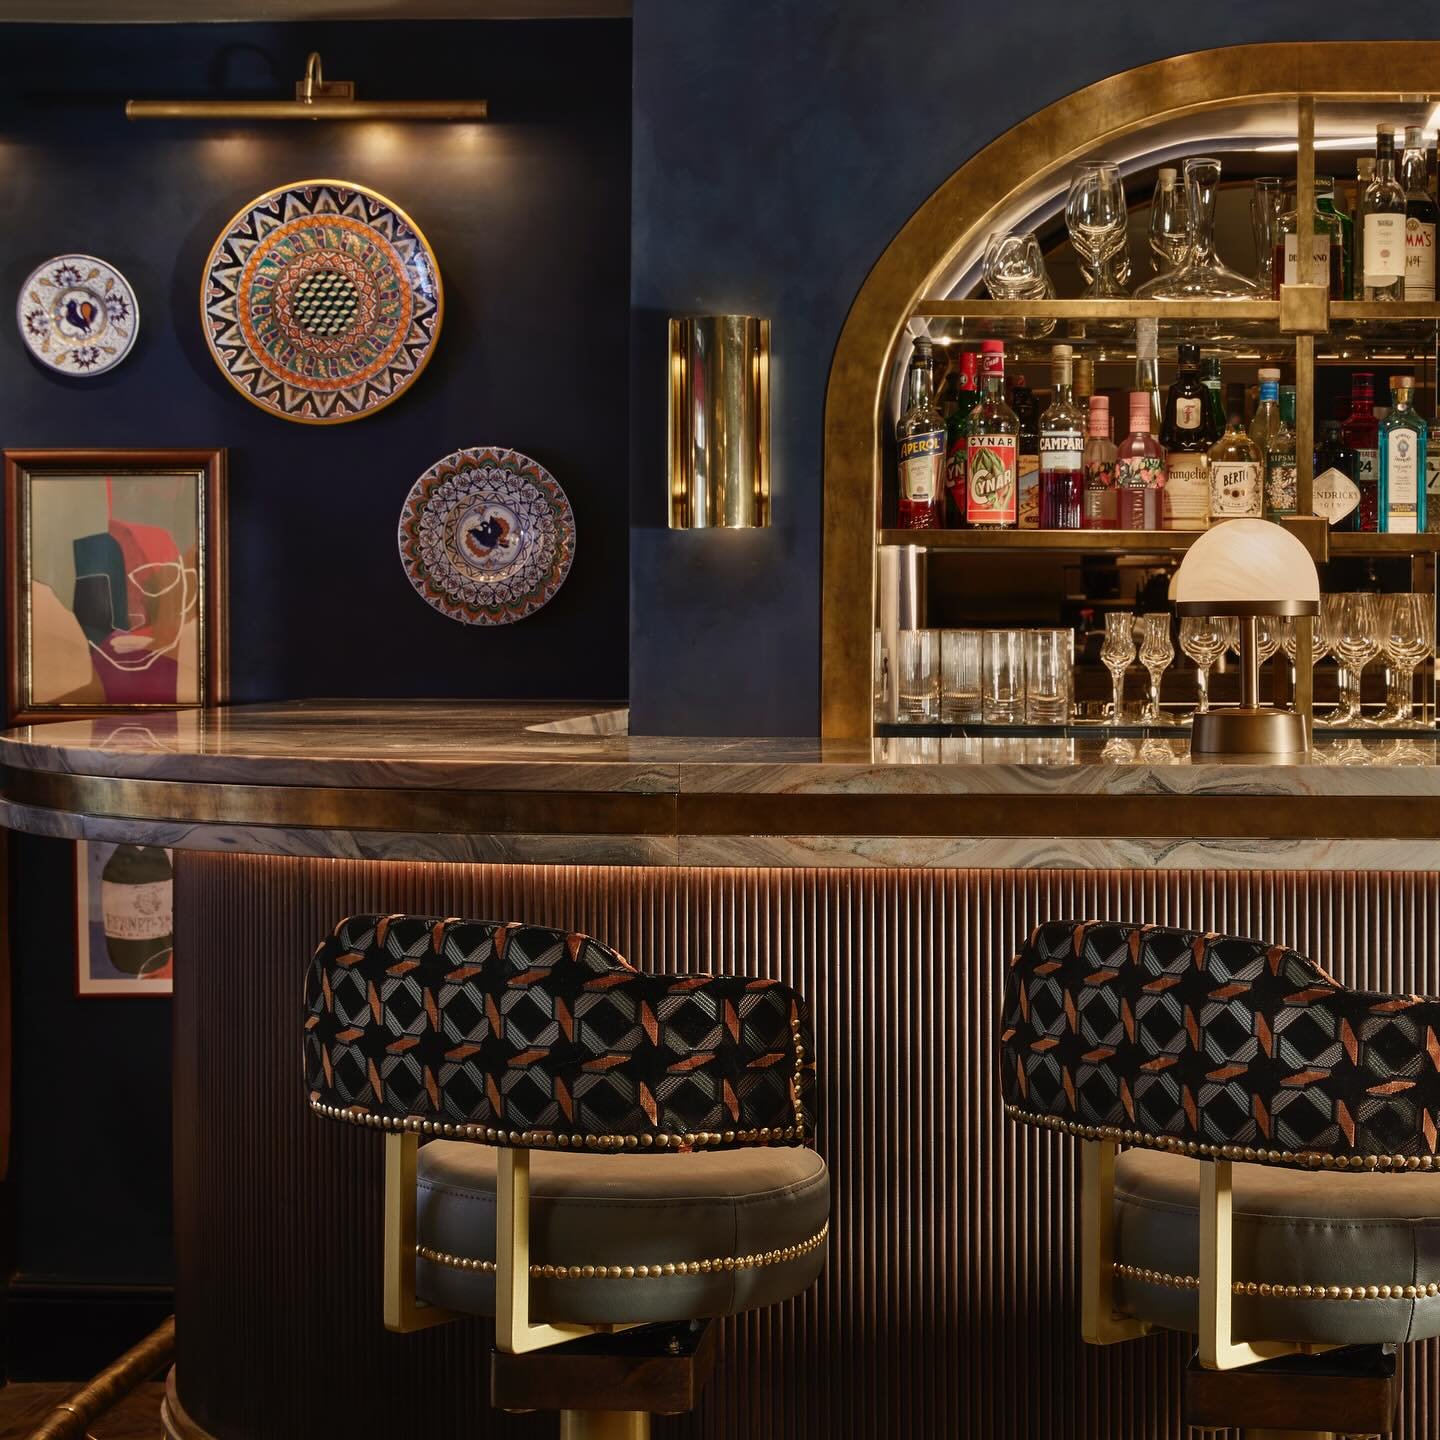 &ldquo;Sale e Pepe is Knightsbridge&rsquo;s own little slice of comfort and charm: you&rsquo;ll dine the first time as a guest, and return the second, third, fourth as family.&rdquo;

@countryandtownhouse